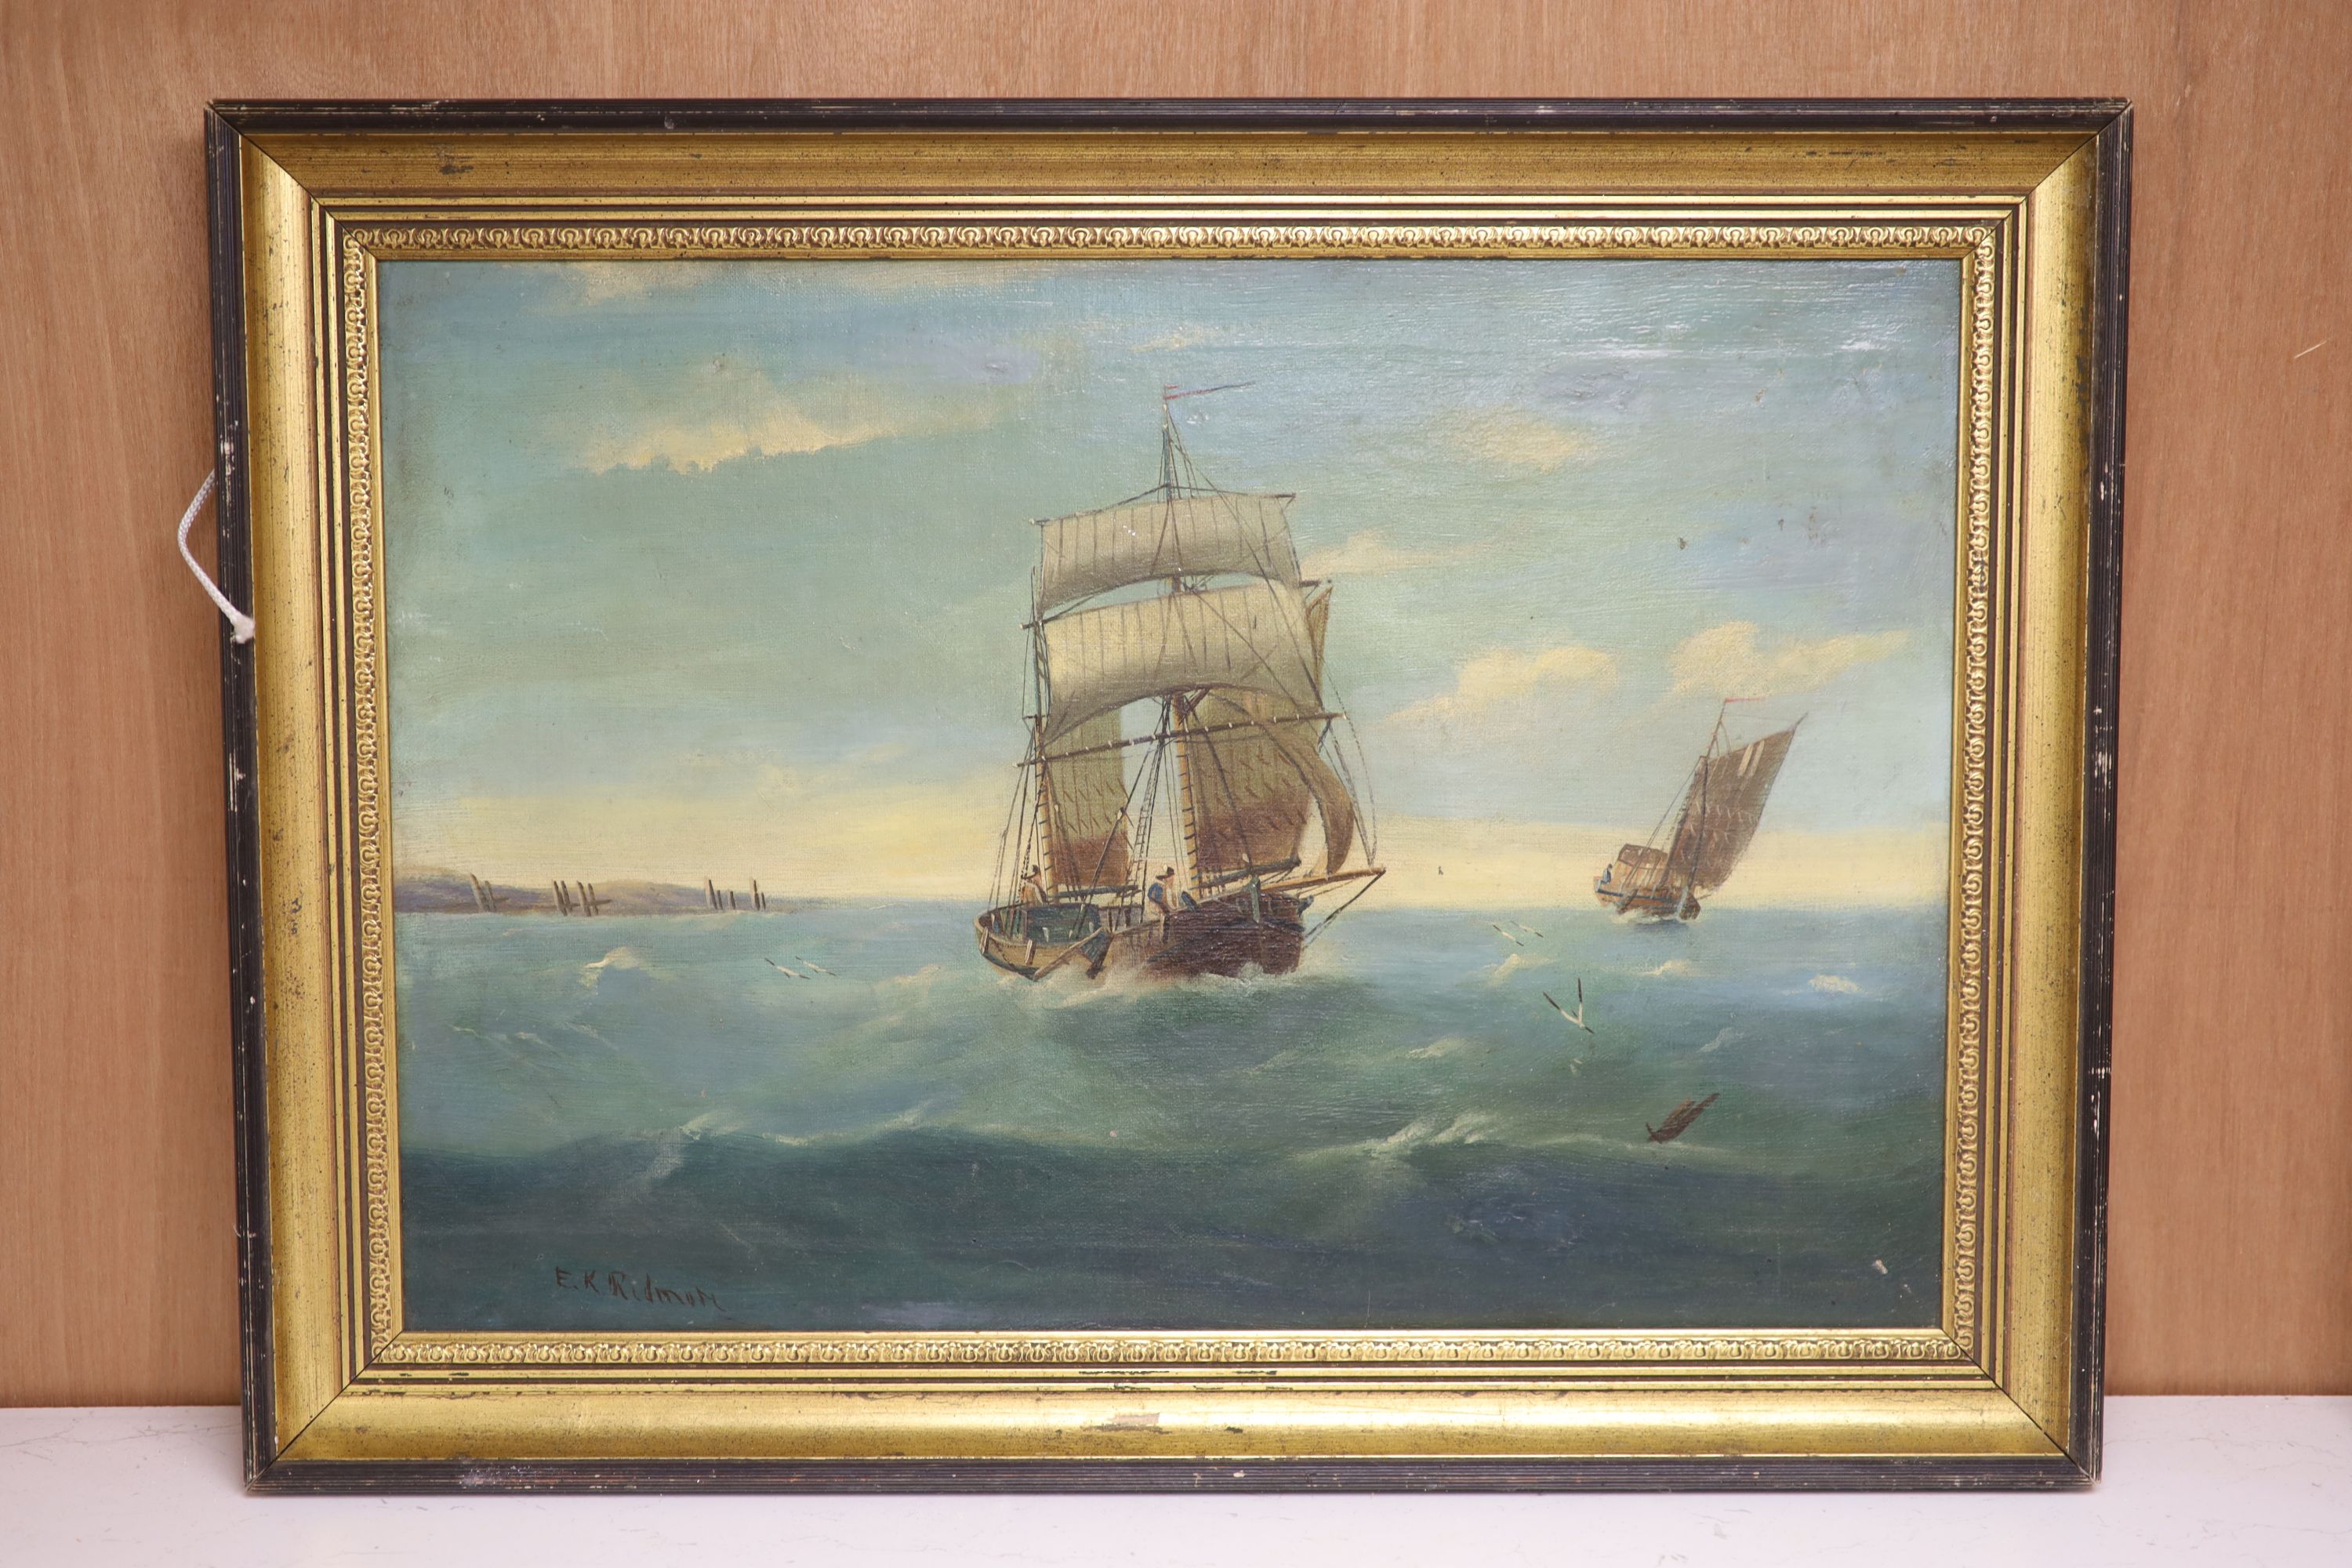 Edward King Redmore (1860-1941), oil on canvas, Sailing boats at sea, signed, 34 x 50cm